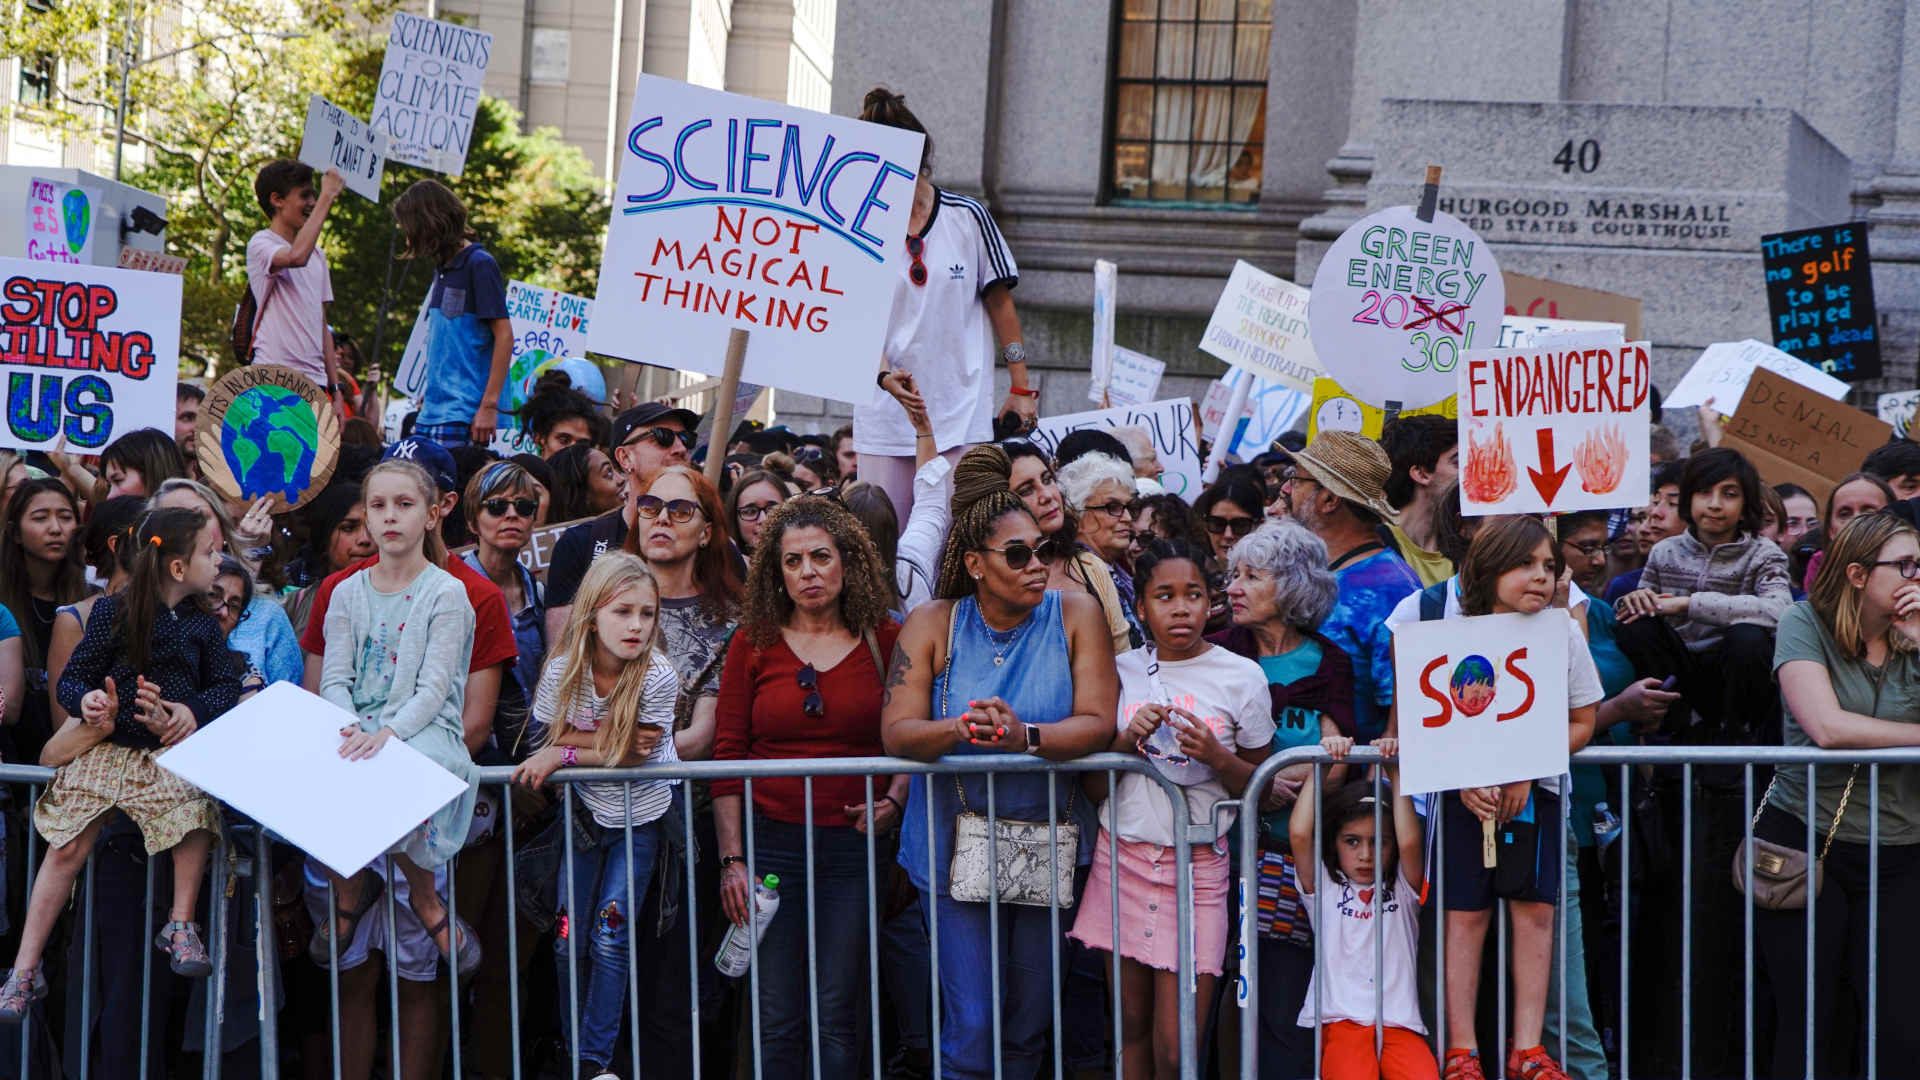 Activists young and old take a stand for action on climate change in New York City in Sept. 2019.